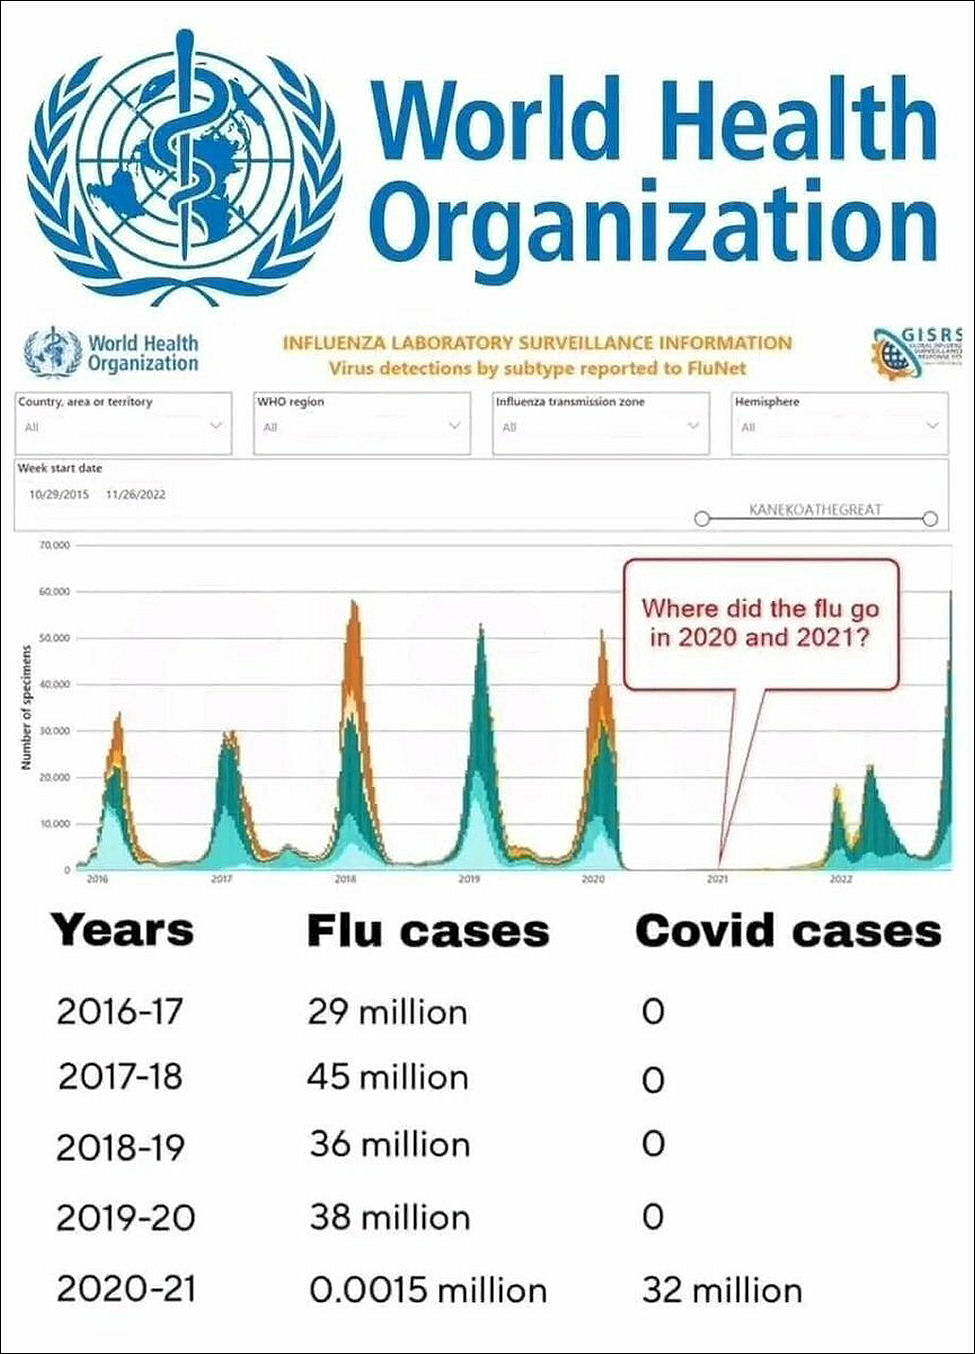 This is a question that stupid people & traitors cannot answer: Q: Where did Influenza go in 2020 & 2021?